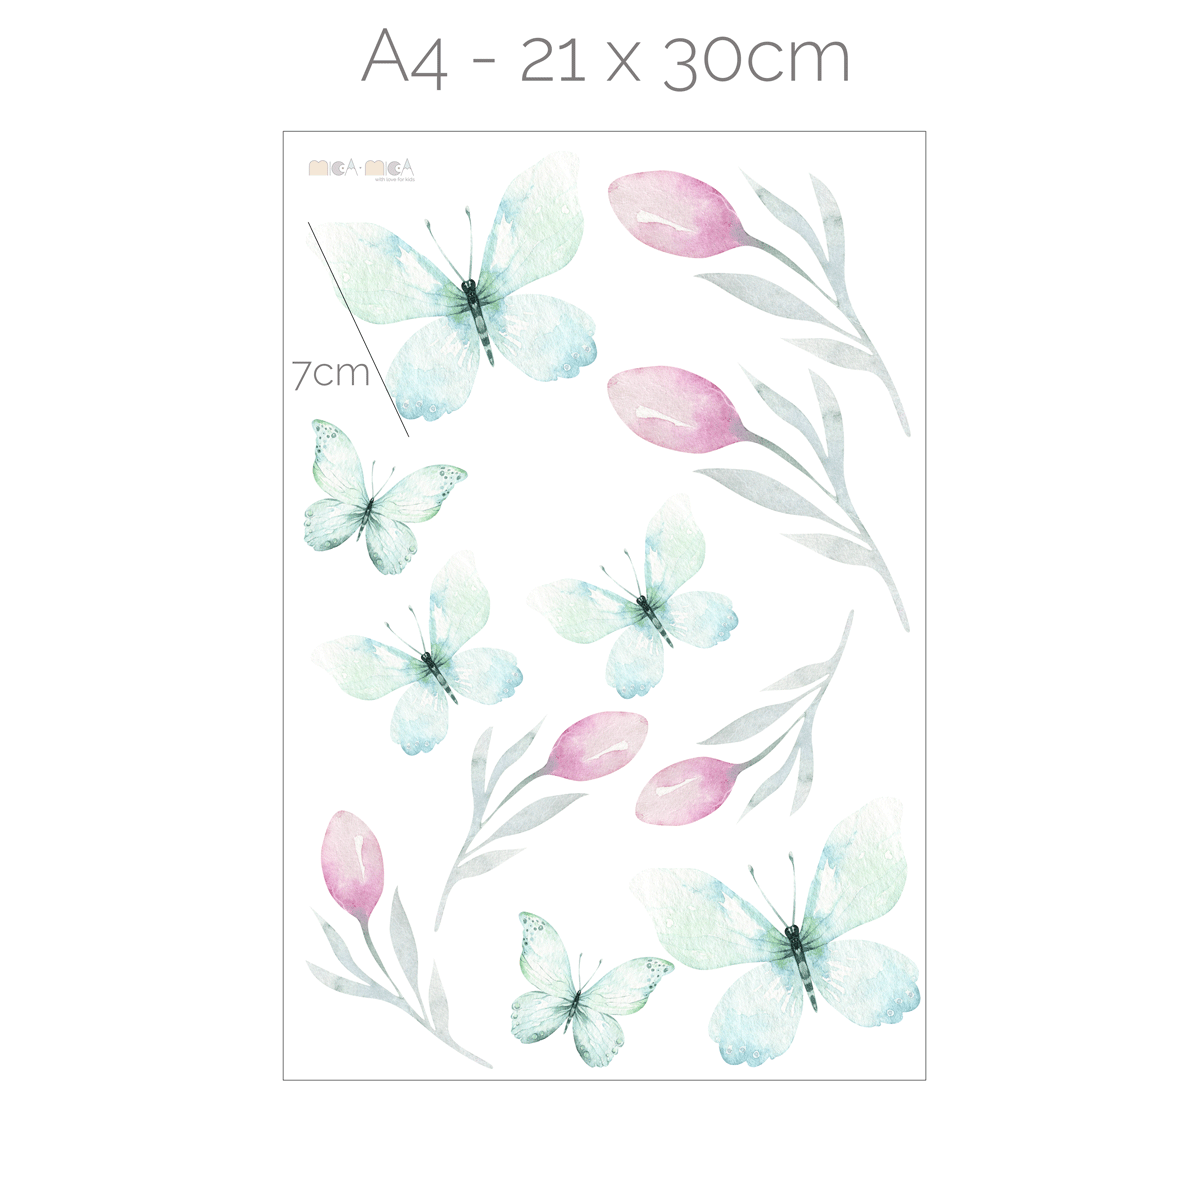 Butterfly wall stickers with spring flowers